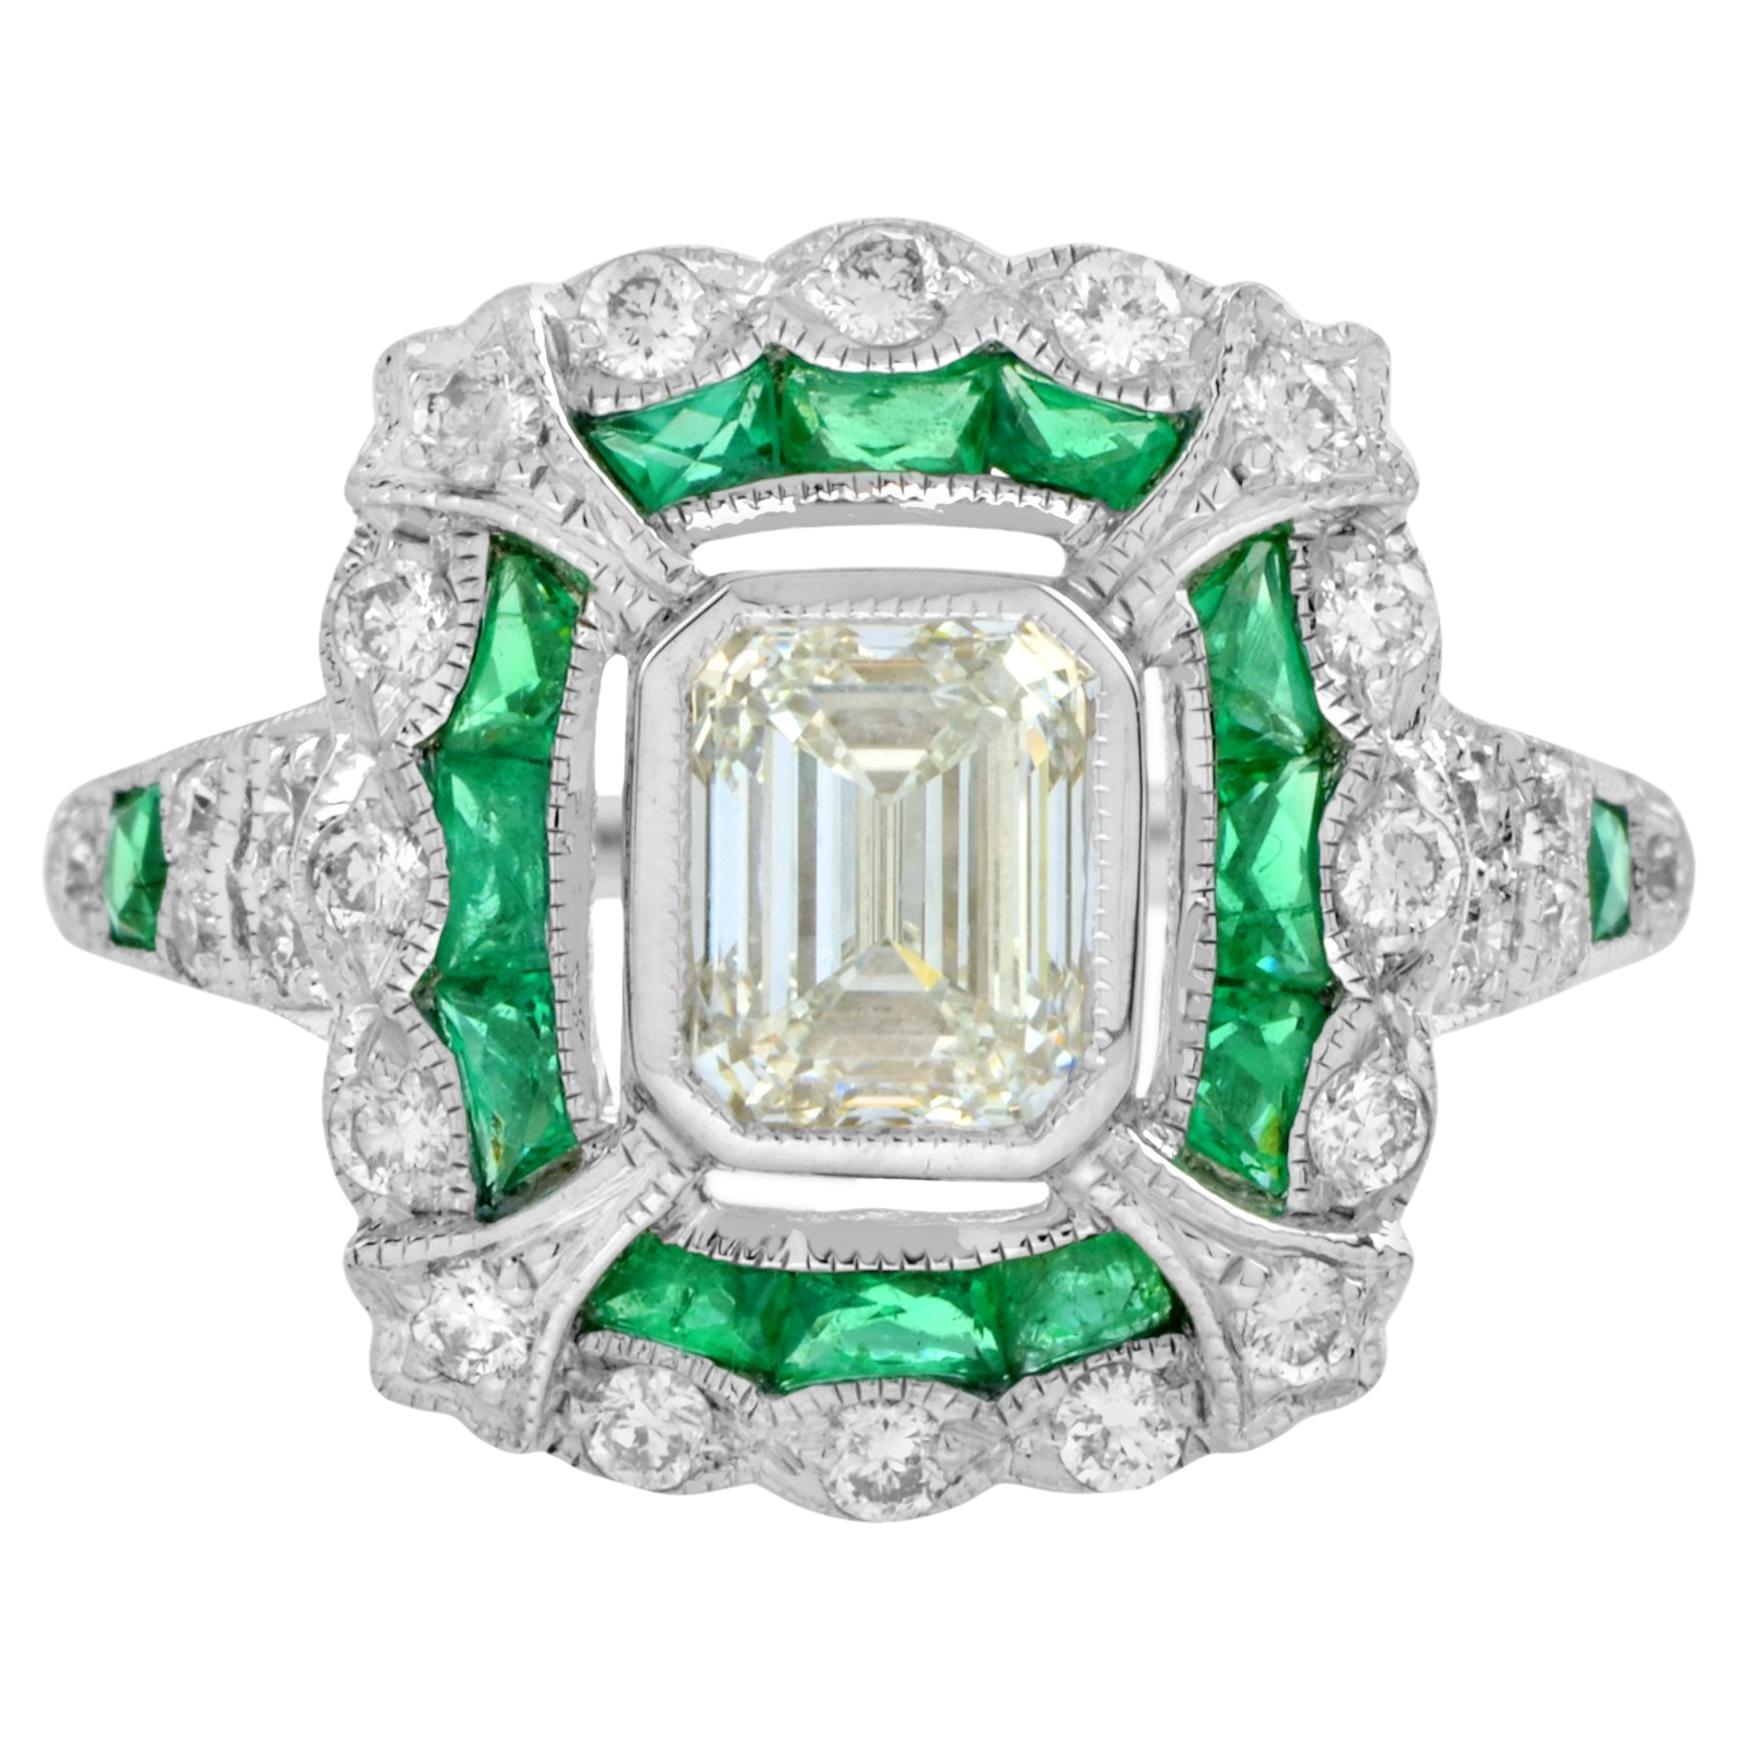 GIA Emerald Cut Diamond Emerald Art Deco Style Engagement Ring in 18k Gold